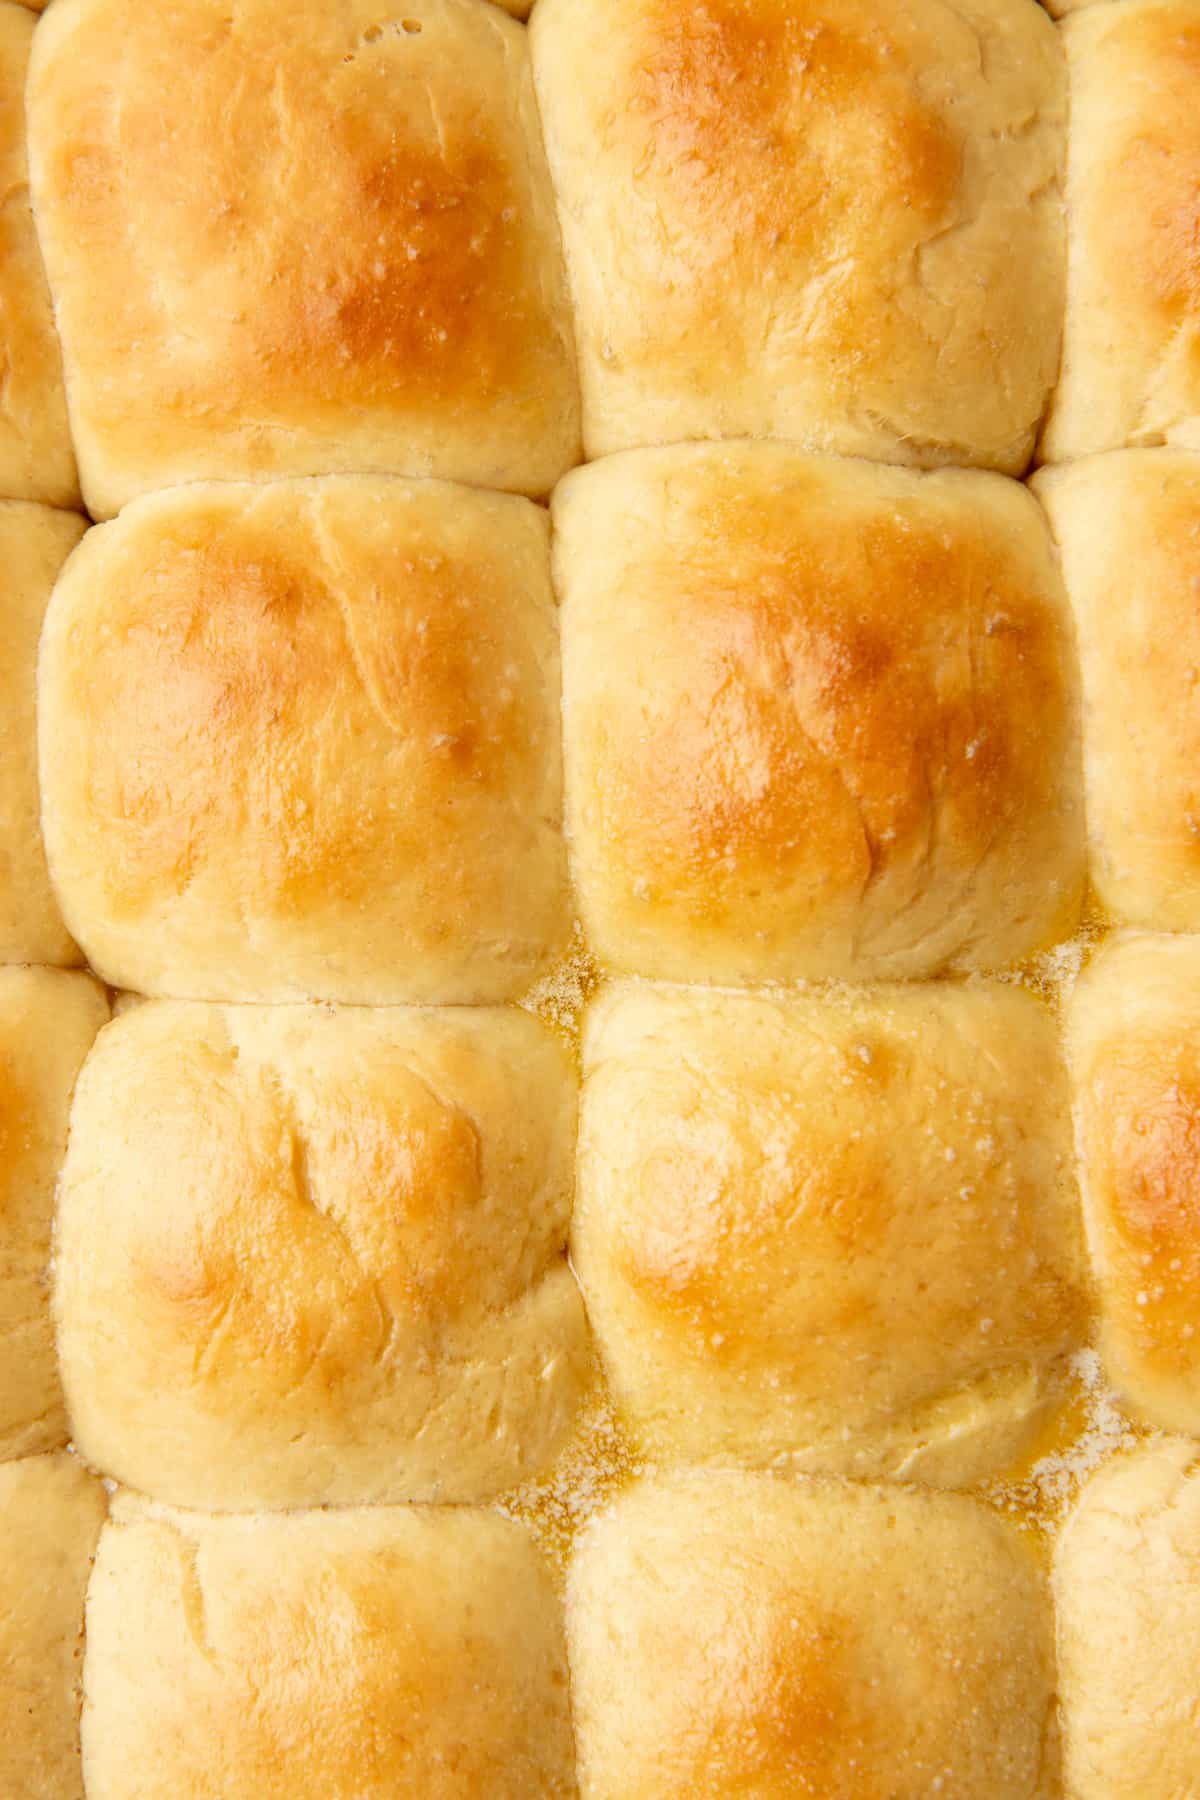 A close up view of baked yeast dinner rolls.